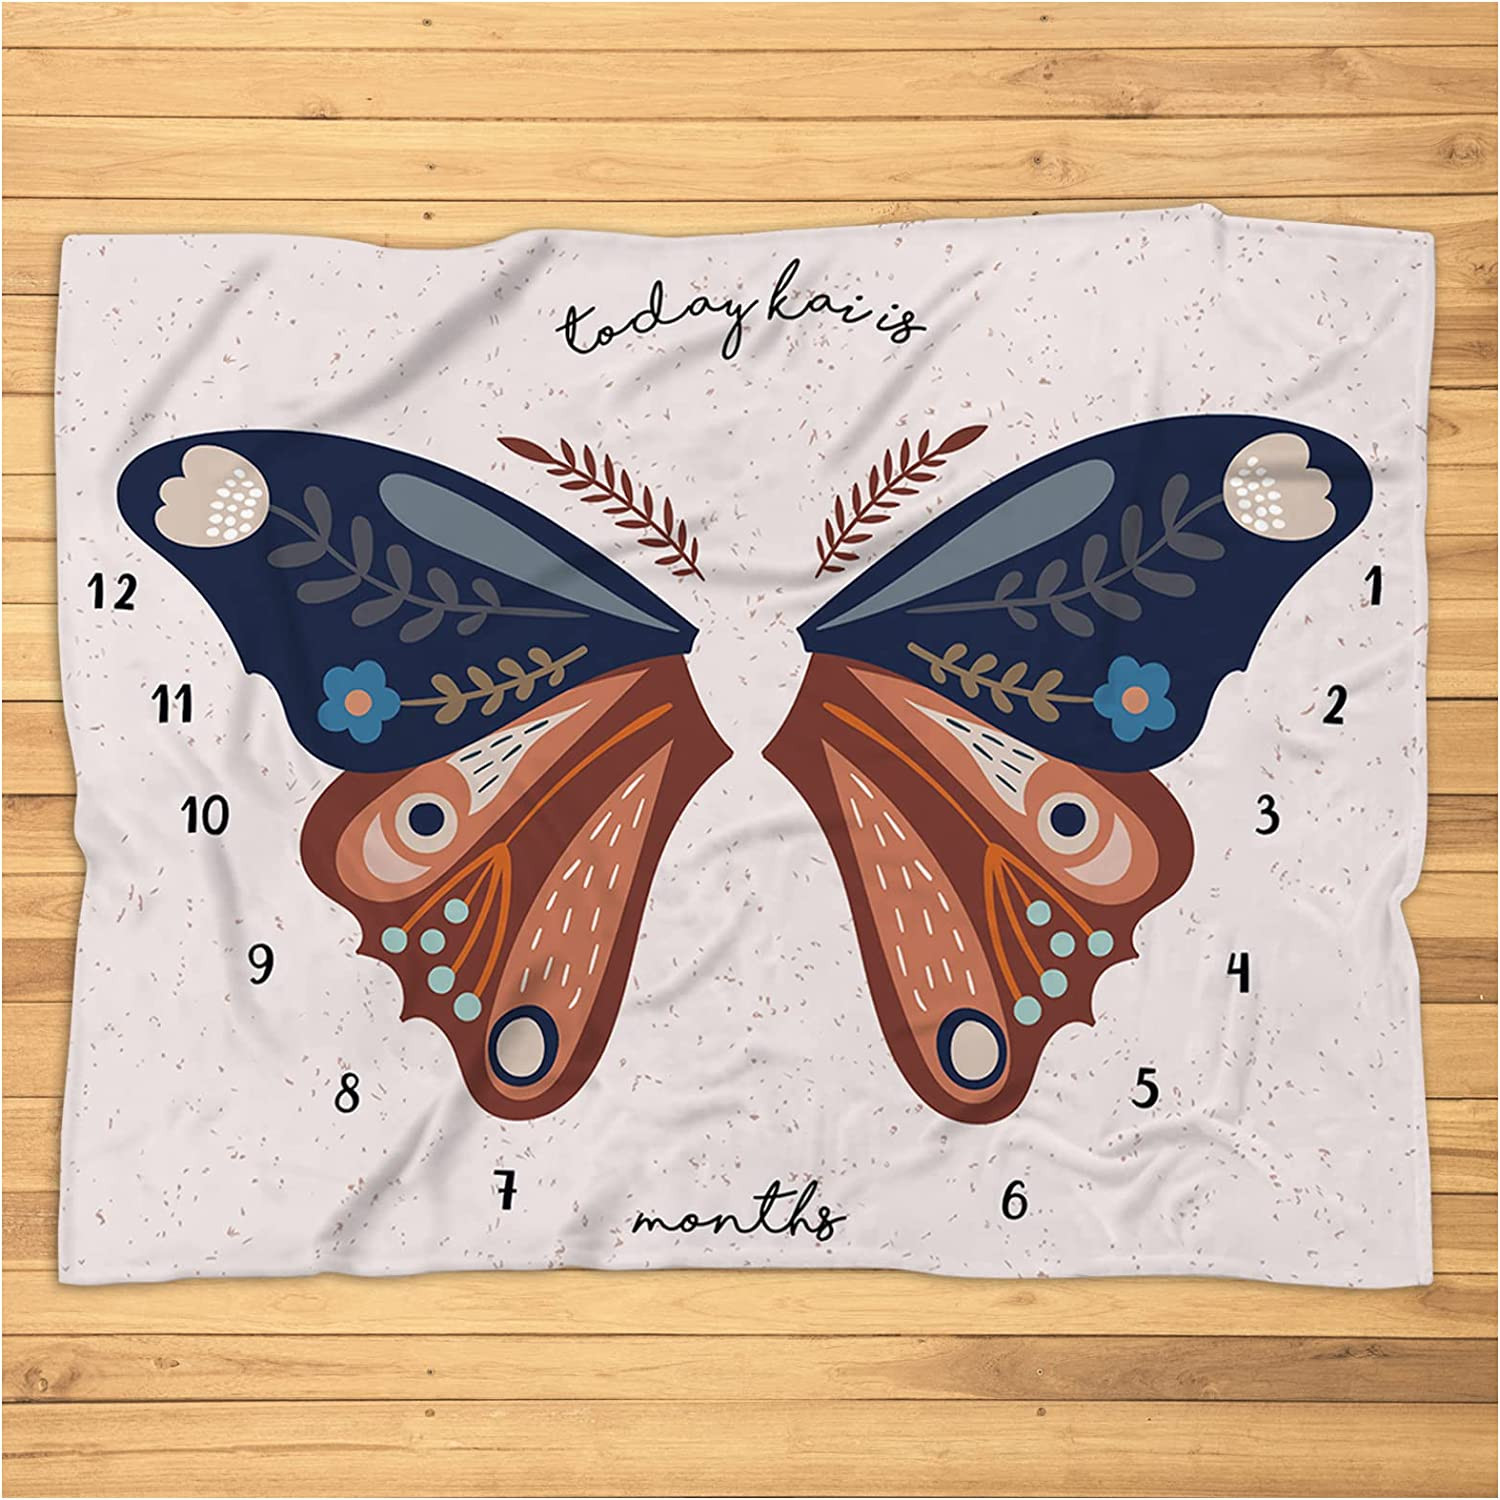 Boho Butterfly Wings Baby Monthly Milestone Blanket Girl, Watch me Grow, Newborn Photography Backdrop, Boho Butterfly Baby Name Blanket, Expecting Mom Gift Blanket, Super Soft Plush Blanket for Baby for Kids